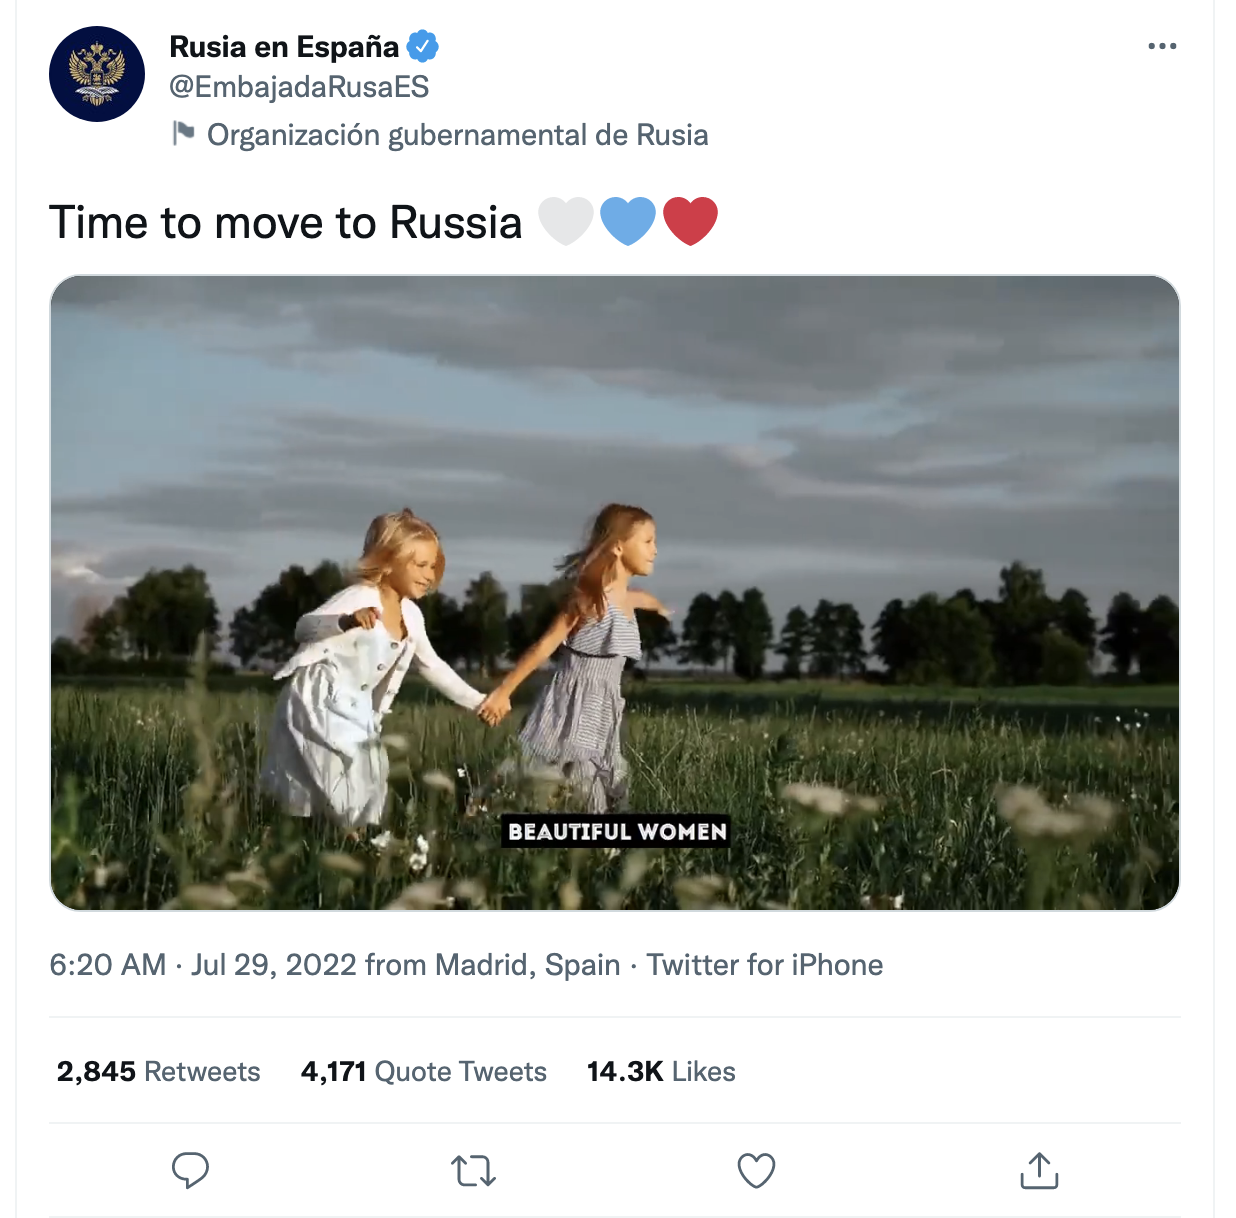 The same footage Doug Mastriano used in his campaign ad of the two girls running through the field was used as part of a propaganda ad posted by the Russian embassy in Spain to its Twitter account in July.